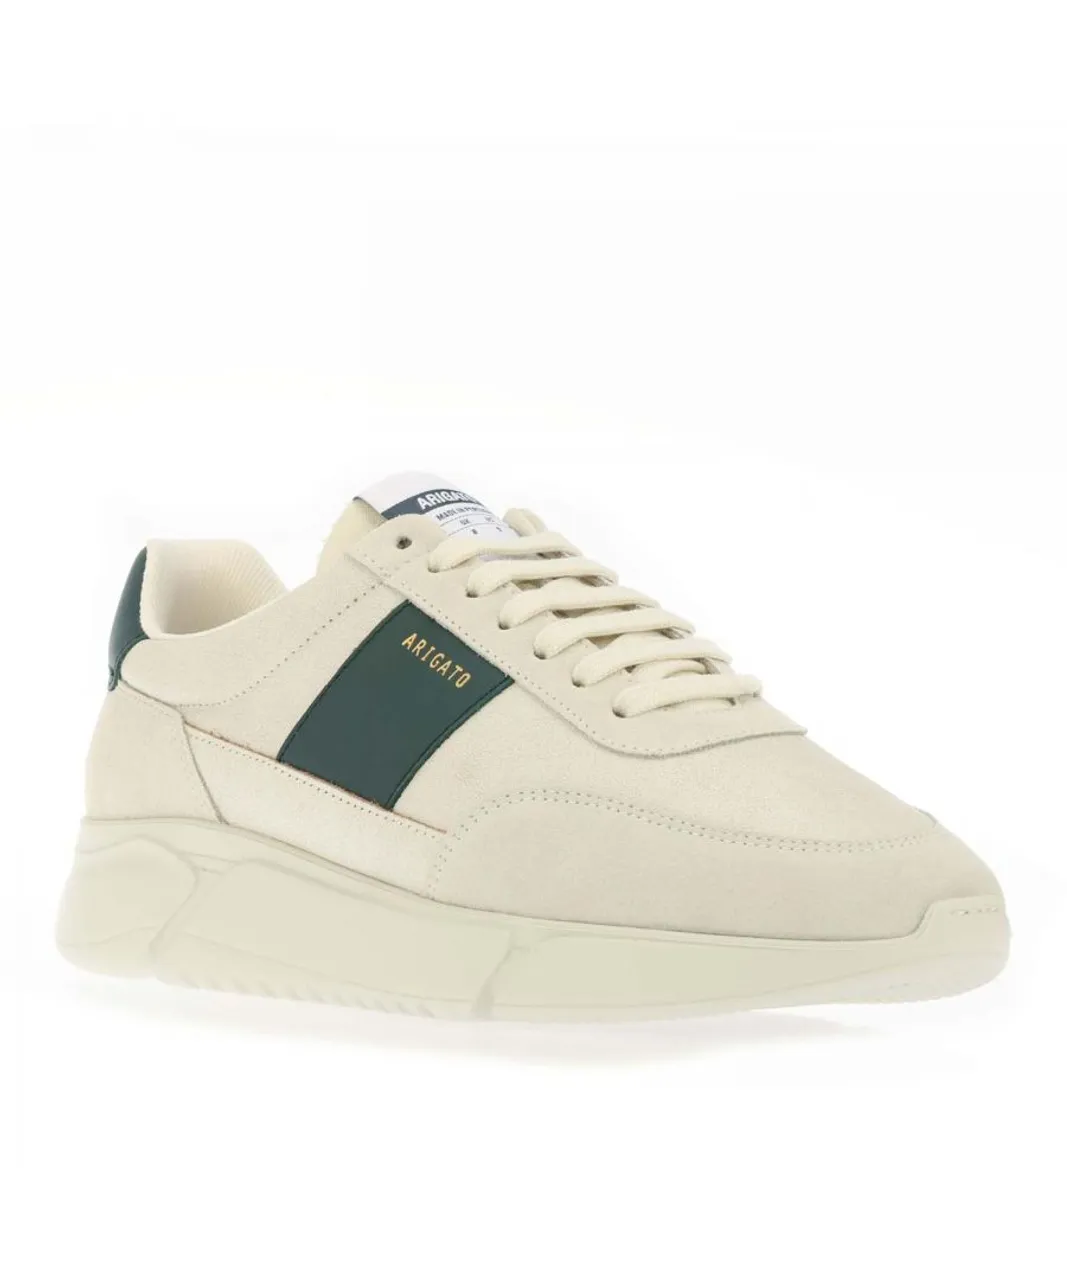 Axel Arigato Mens Geneis Vintage Runner Trainers in Beige Leather (archived)